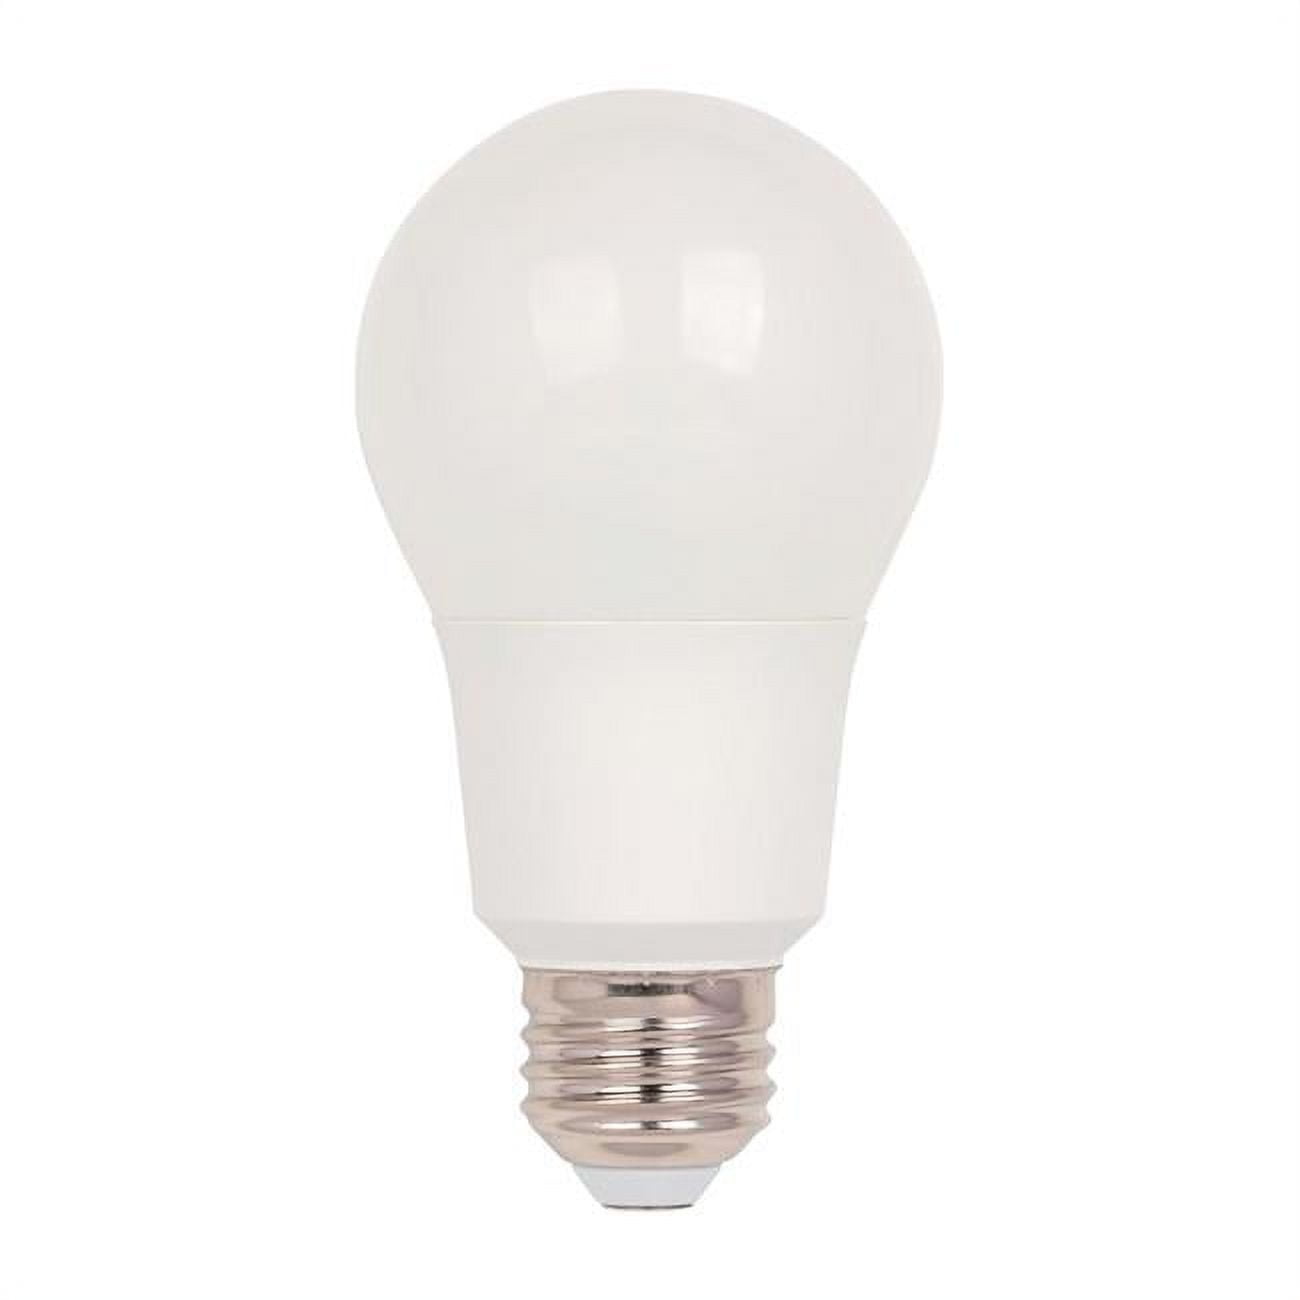 Picture of Westinghouse 3908605 11W A19 LED Bulb, 1100 Lumens - Daylight